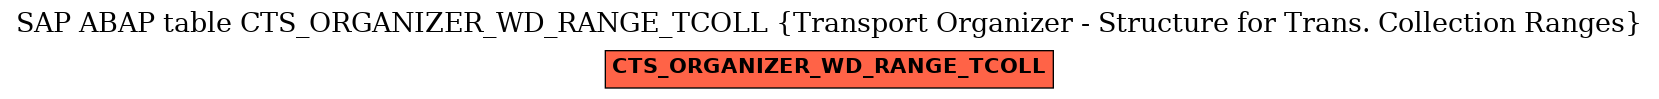 E-R Diagram for table CTS_ORGANIZER_WD_RANGE_TCOLL (Transport Organizer - Structure for Trans. Collection Ranges)